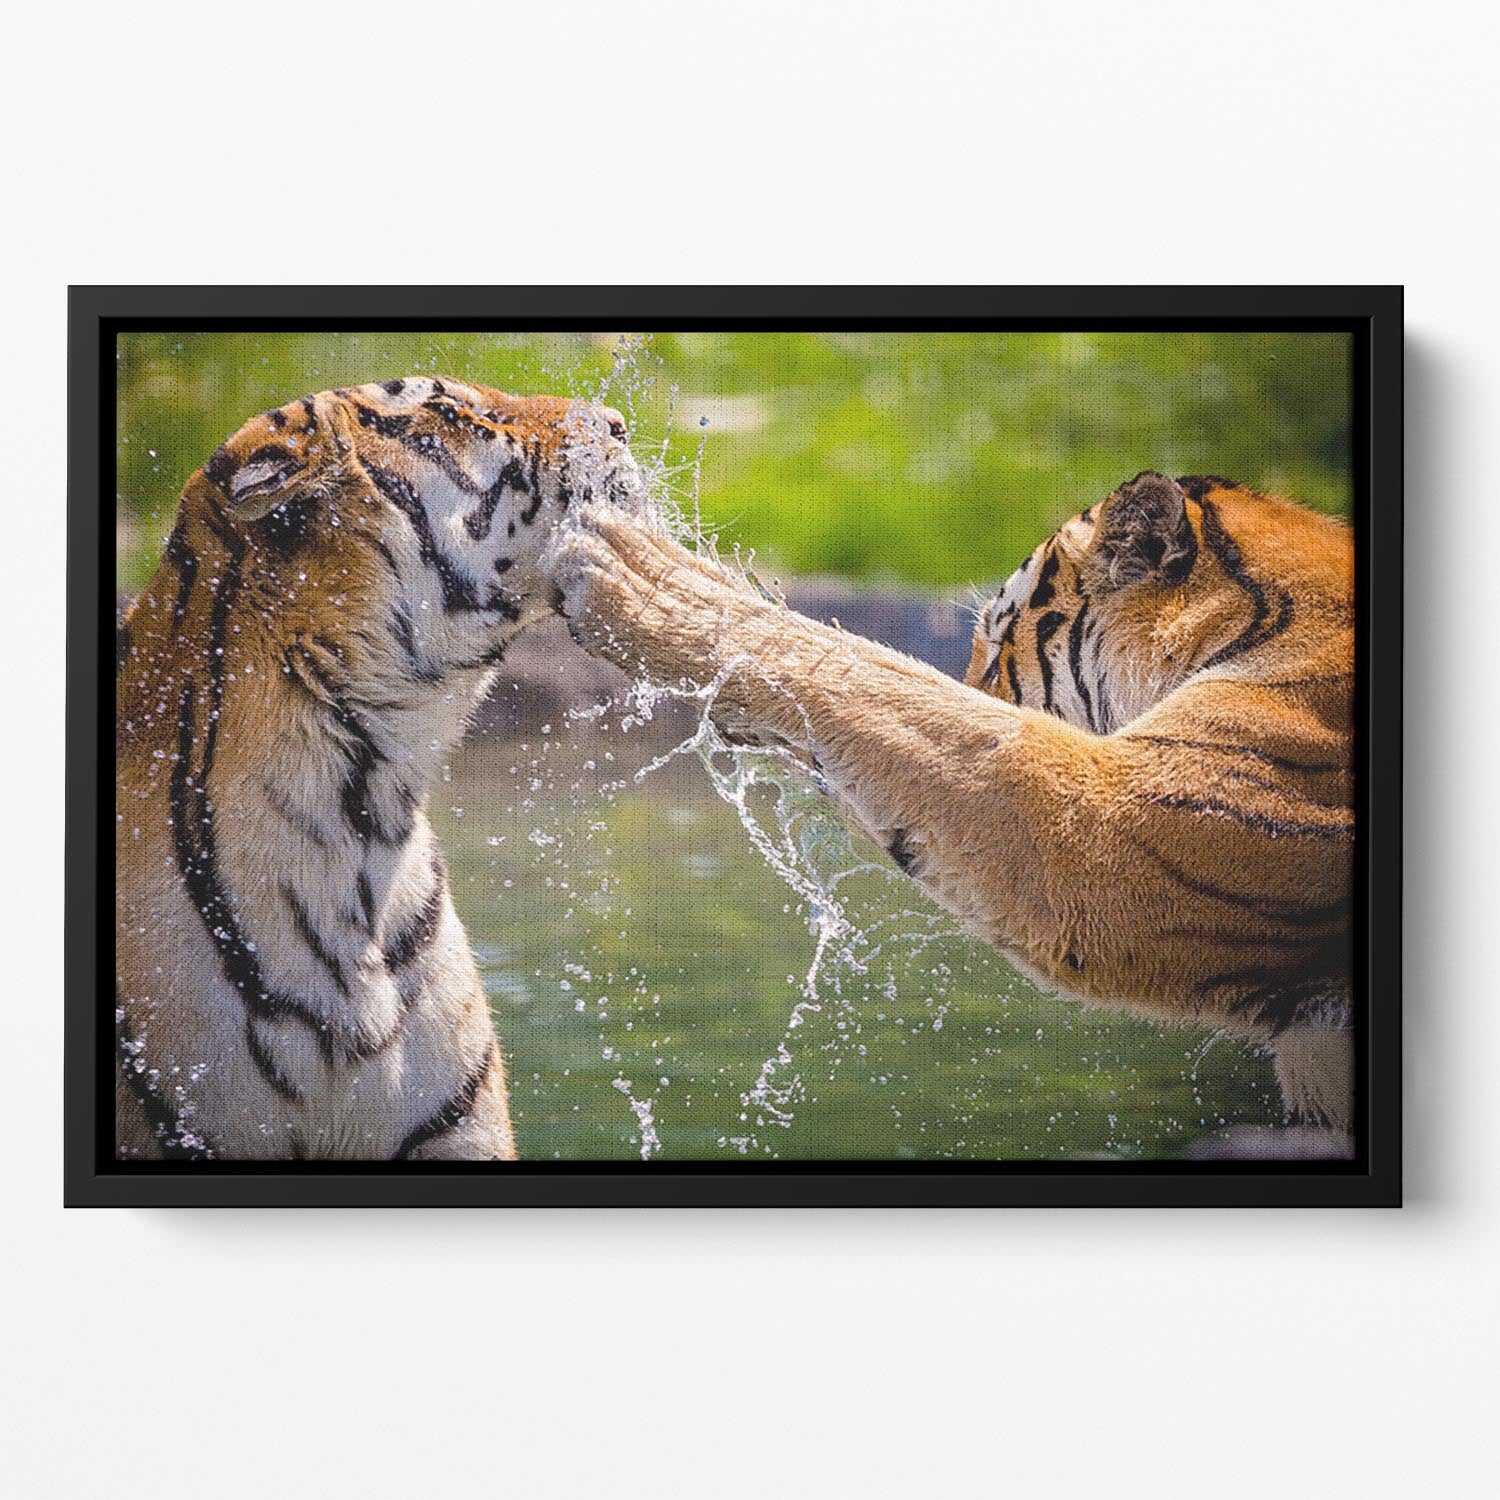 Two adult tigers at play in the water Floating Framed Canvas - Canvas Art Rocks - 2